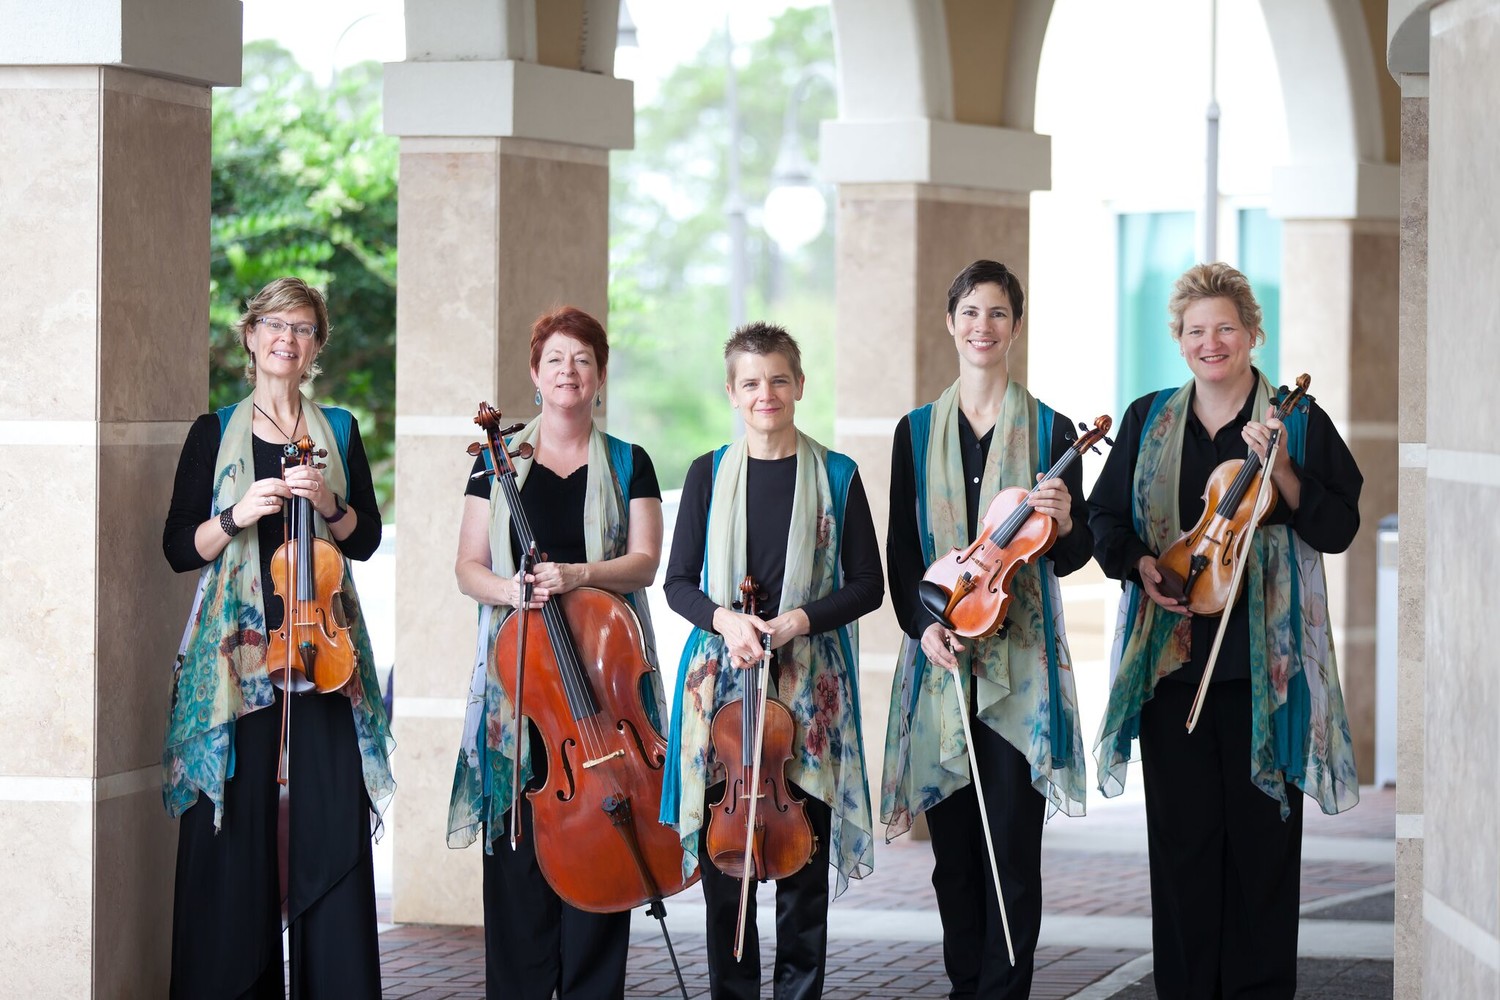 Violinist Annie Hertler, cellist Laurie Casseday, violist Susan Pardue and violinists Anna Genest and Patice Evans of the Florida Chamber Music Project